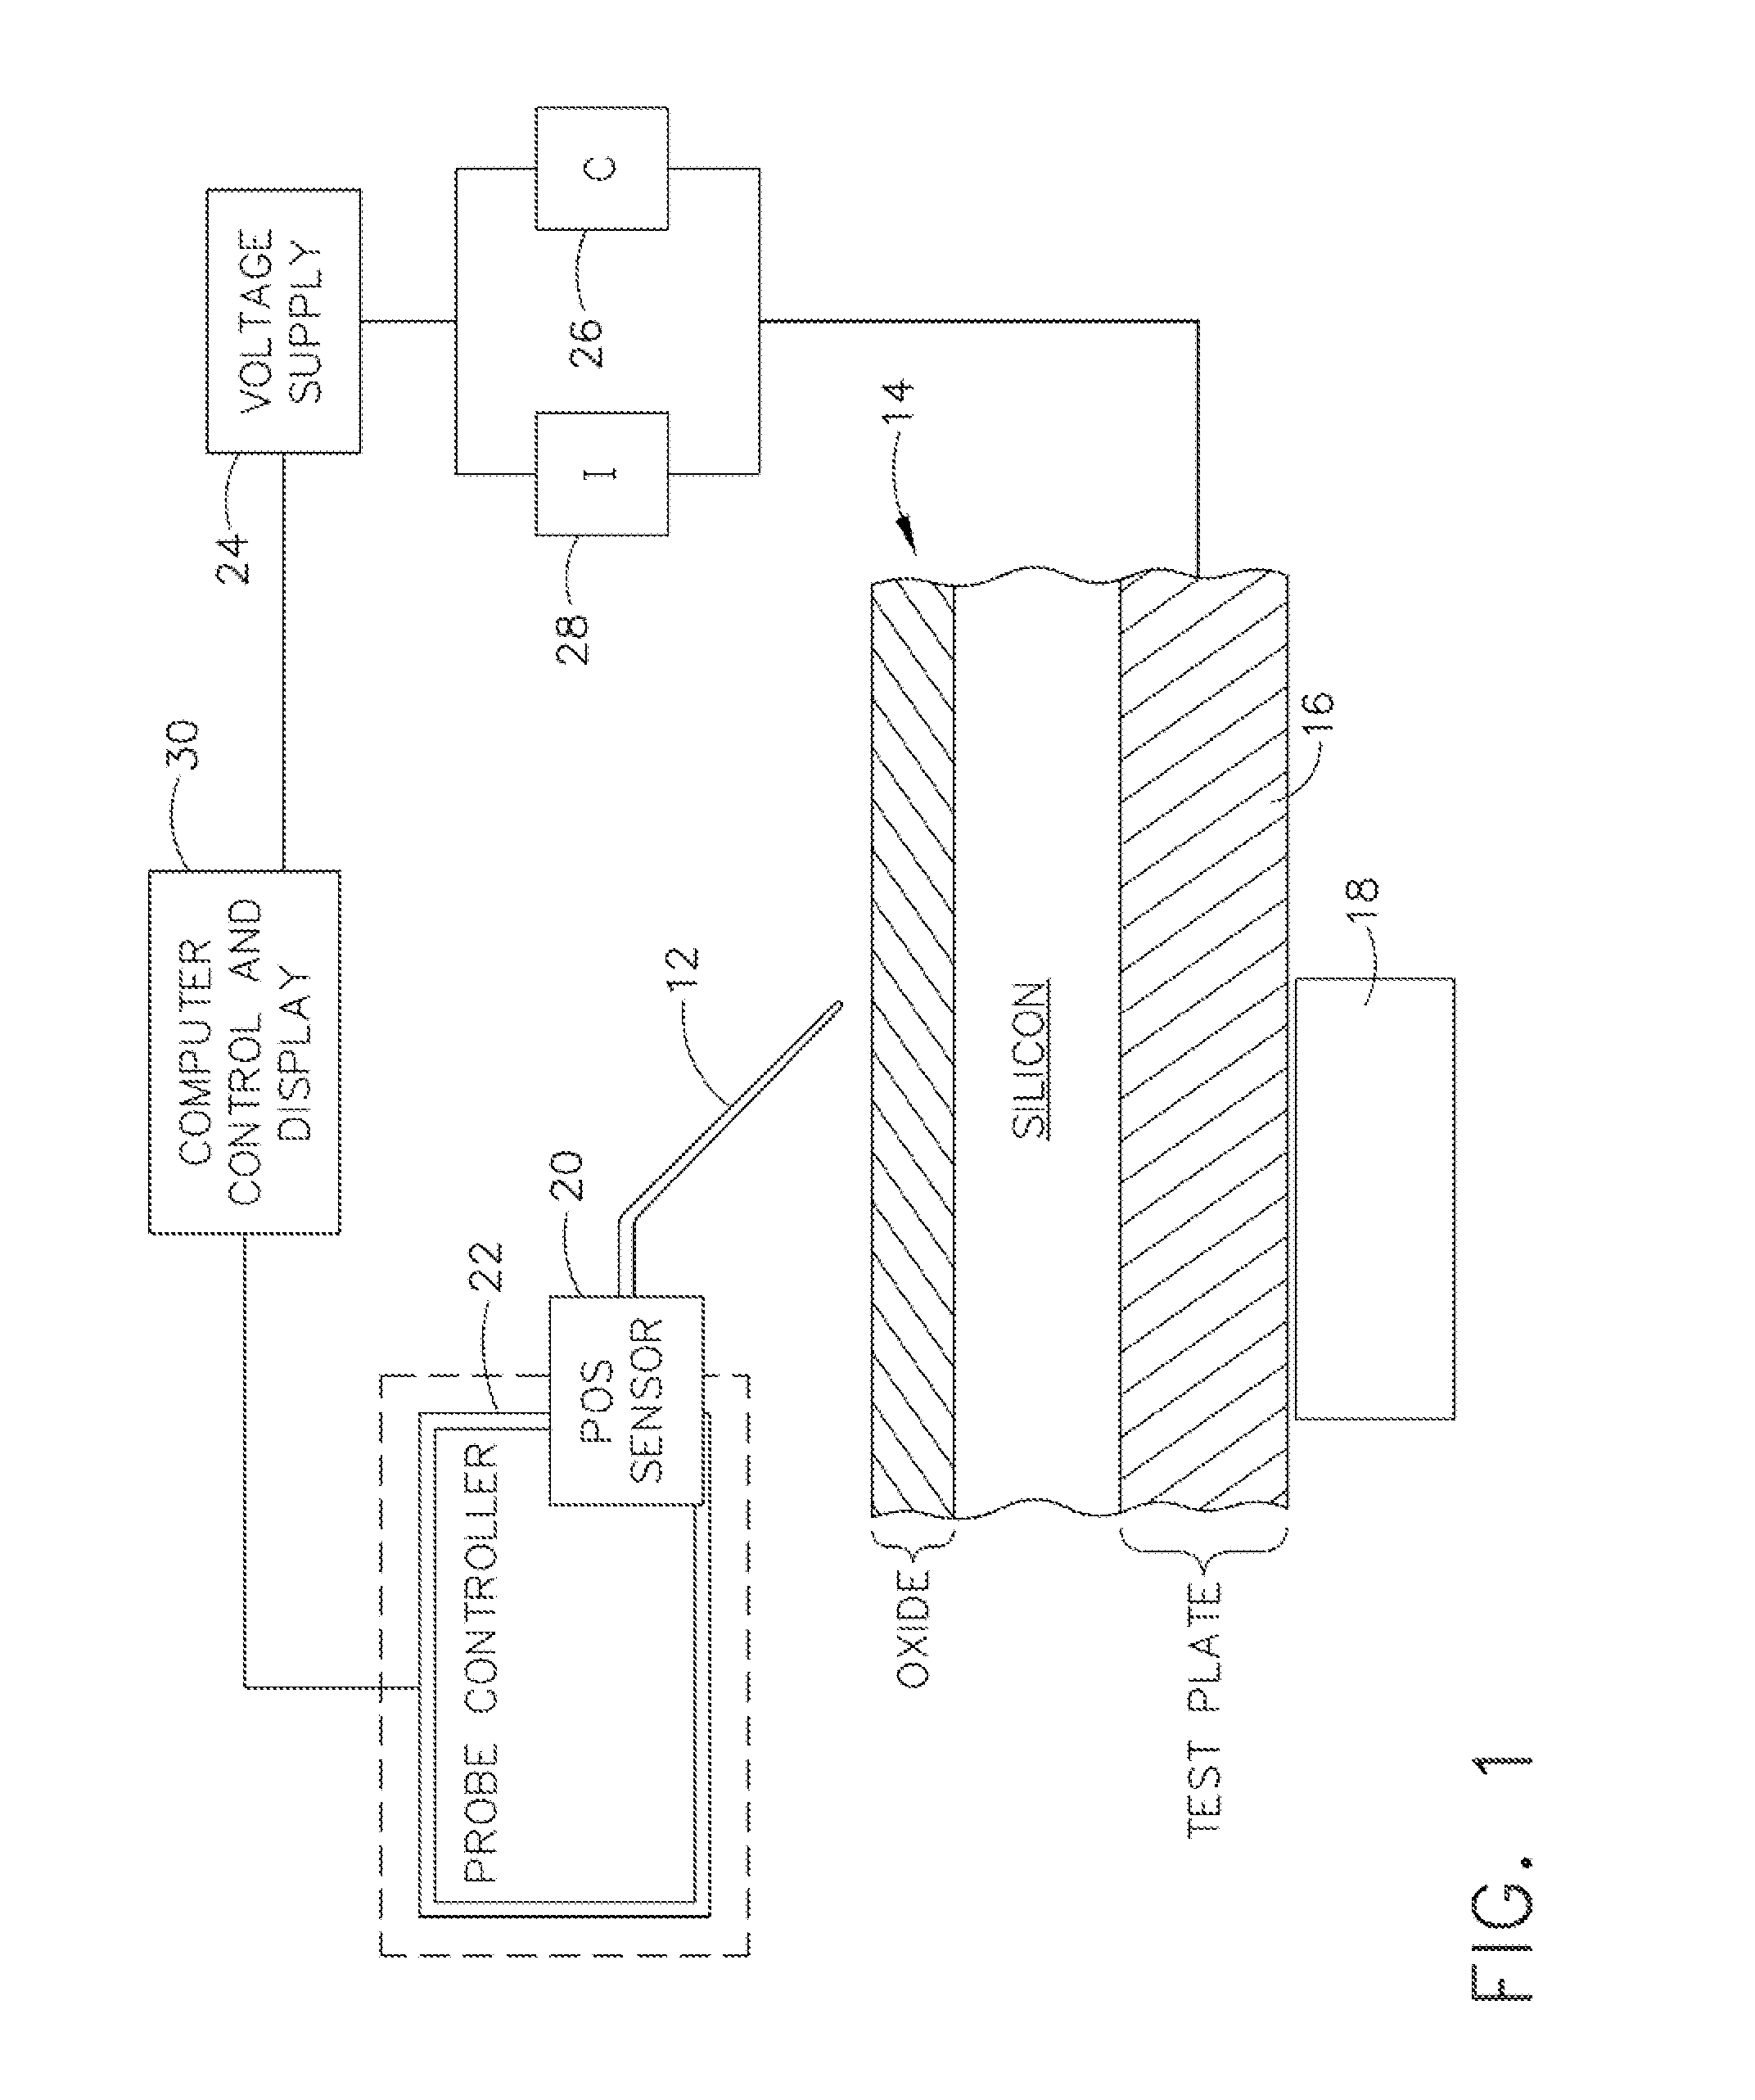 Apparatus and method for combined micro-scale and nano-scale c-v, q-v, and i-v testing of semiconductor materials